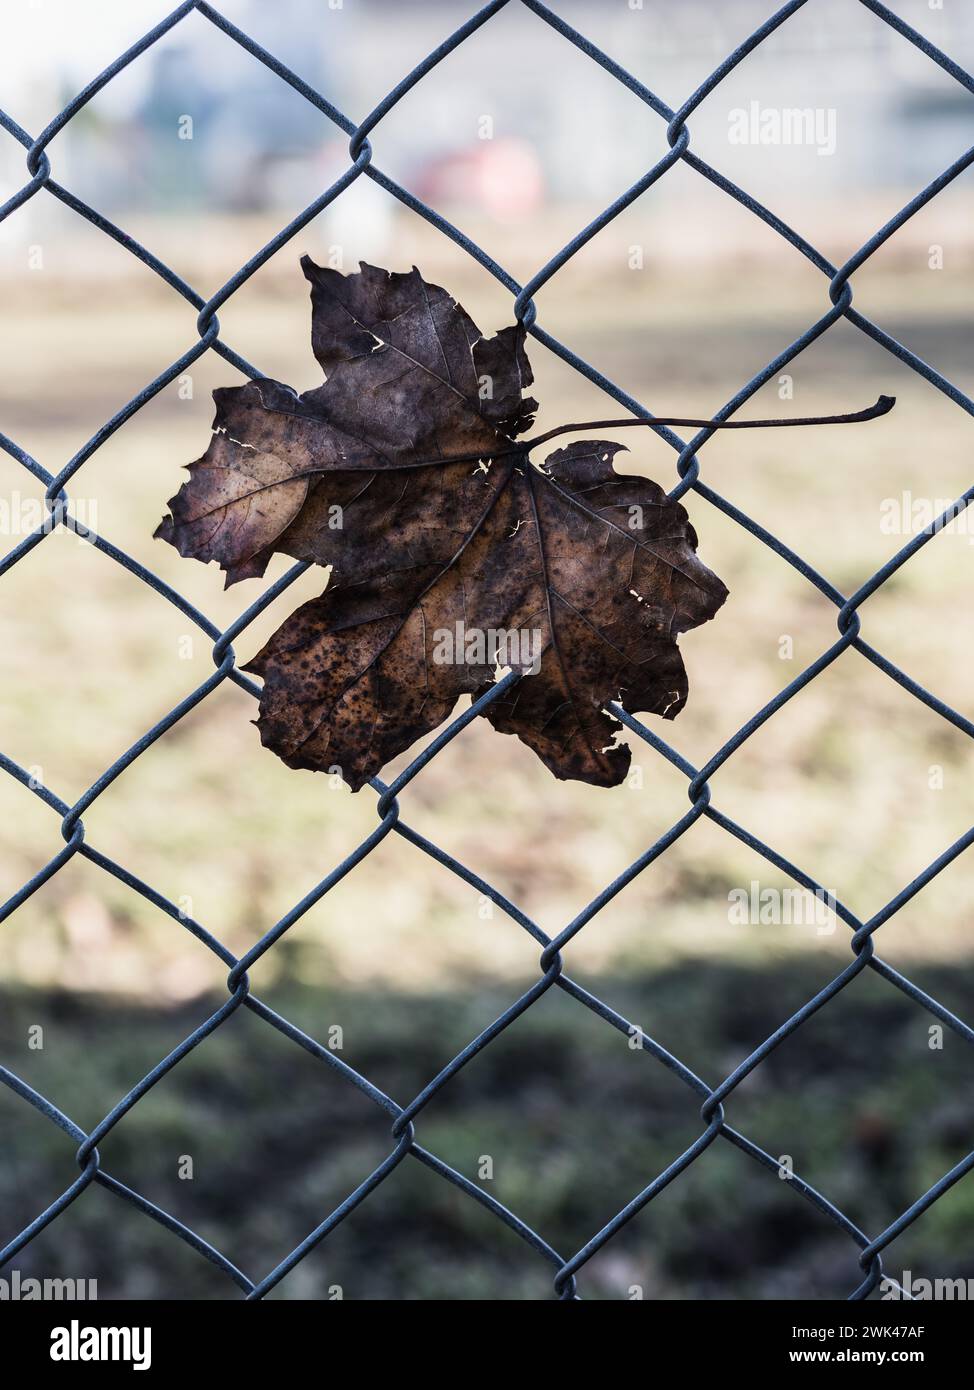 This image captures a solitary withered brown leaf entangled within the diamond patterns of a chain link fence. The leaf’s veins are distinctly visibl Stock Photo